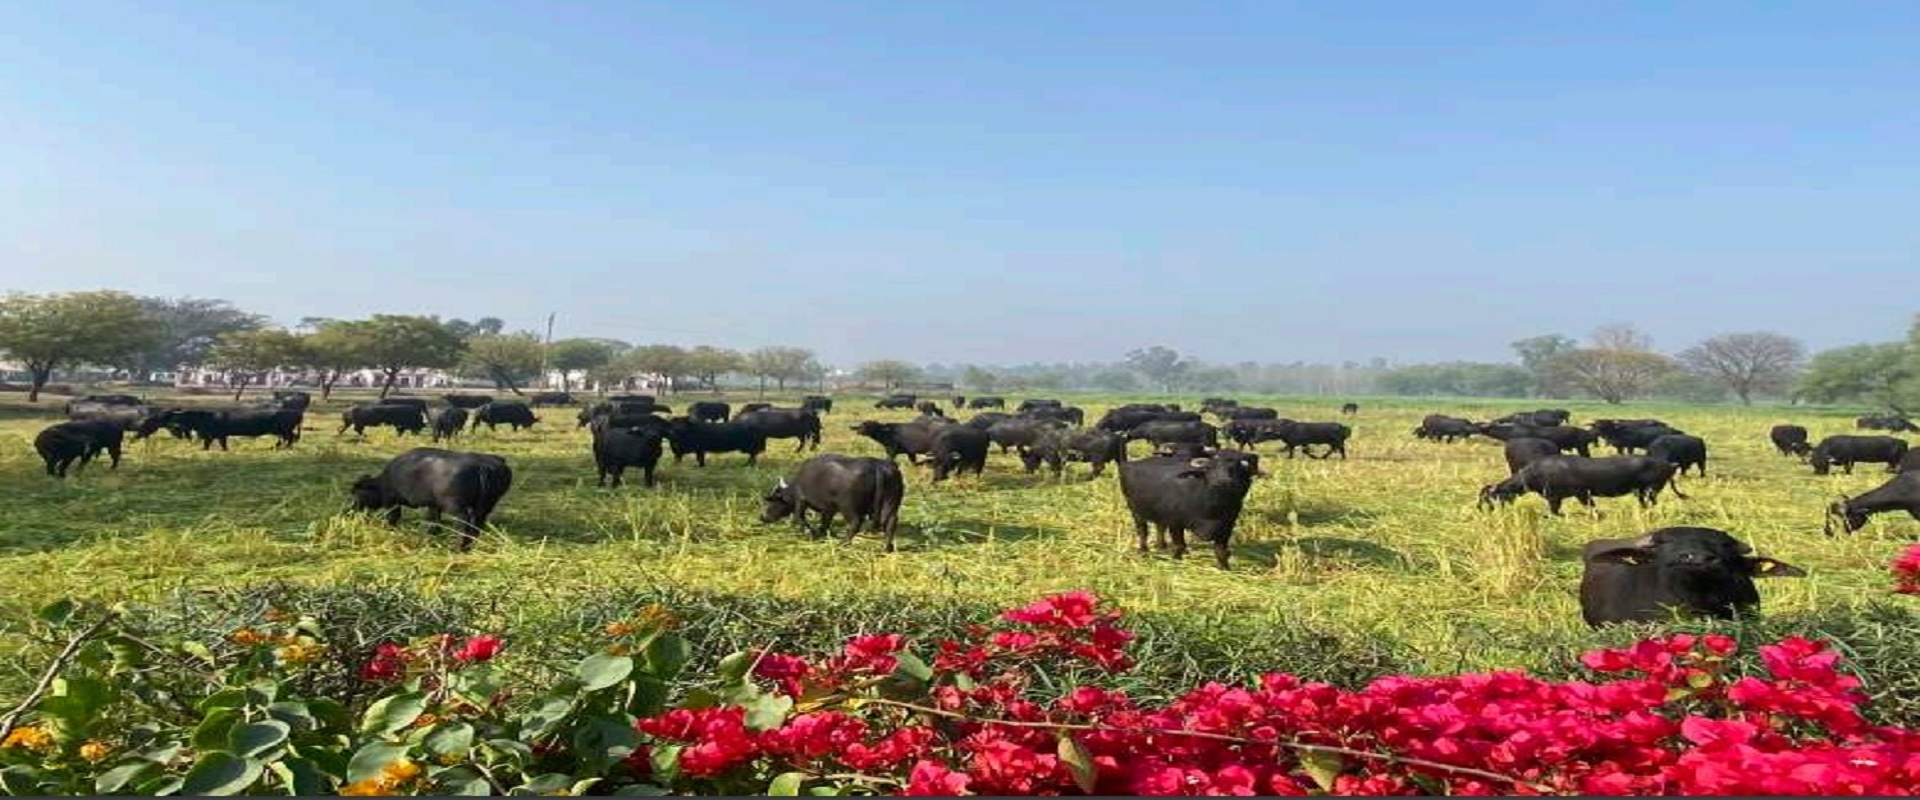 Grazing Buffaloes picture